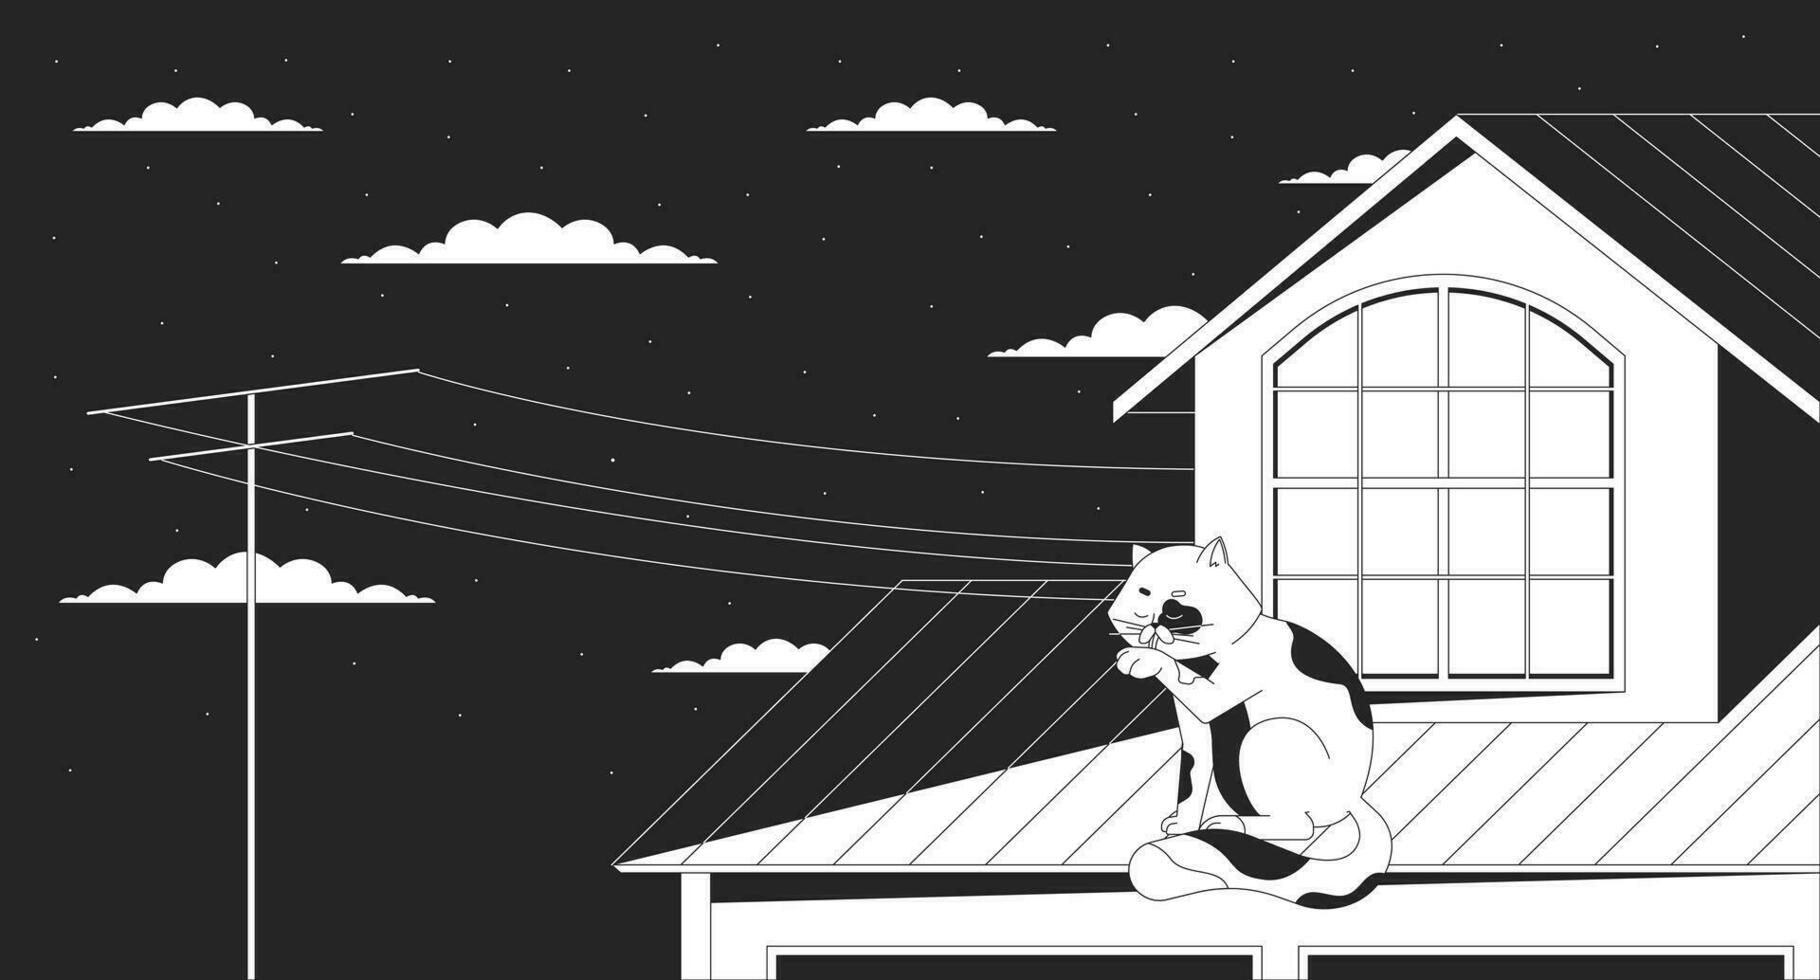 Cat licking paw on roof at night black and white lofi wallpaper. Peaceful kitty rooftop 2D outline cartoon flat illustration. Nostalgia retro style. Dreamy vibes vector line lo fi aesthetic background